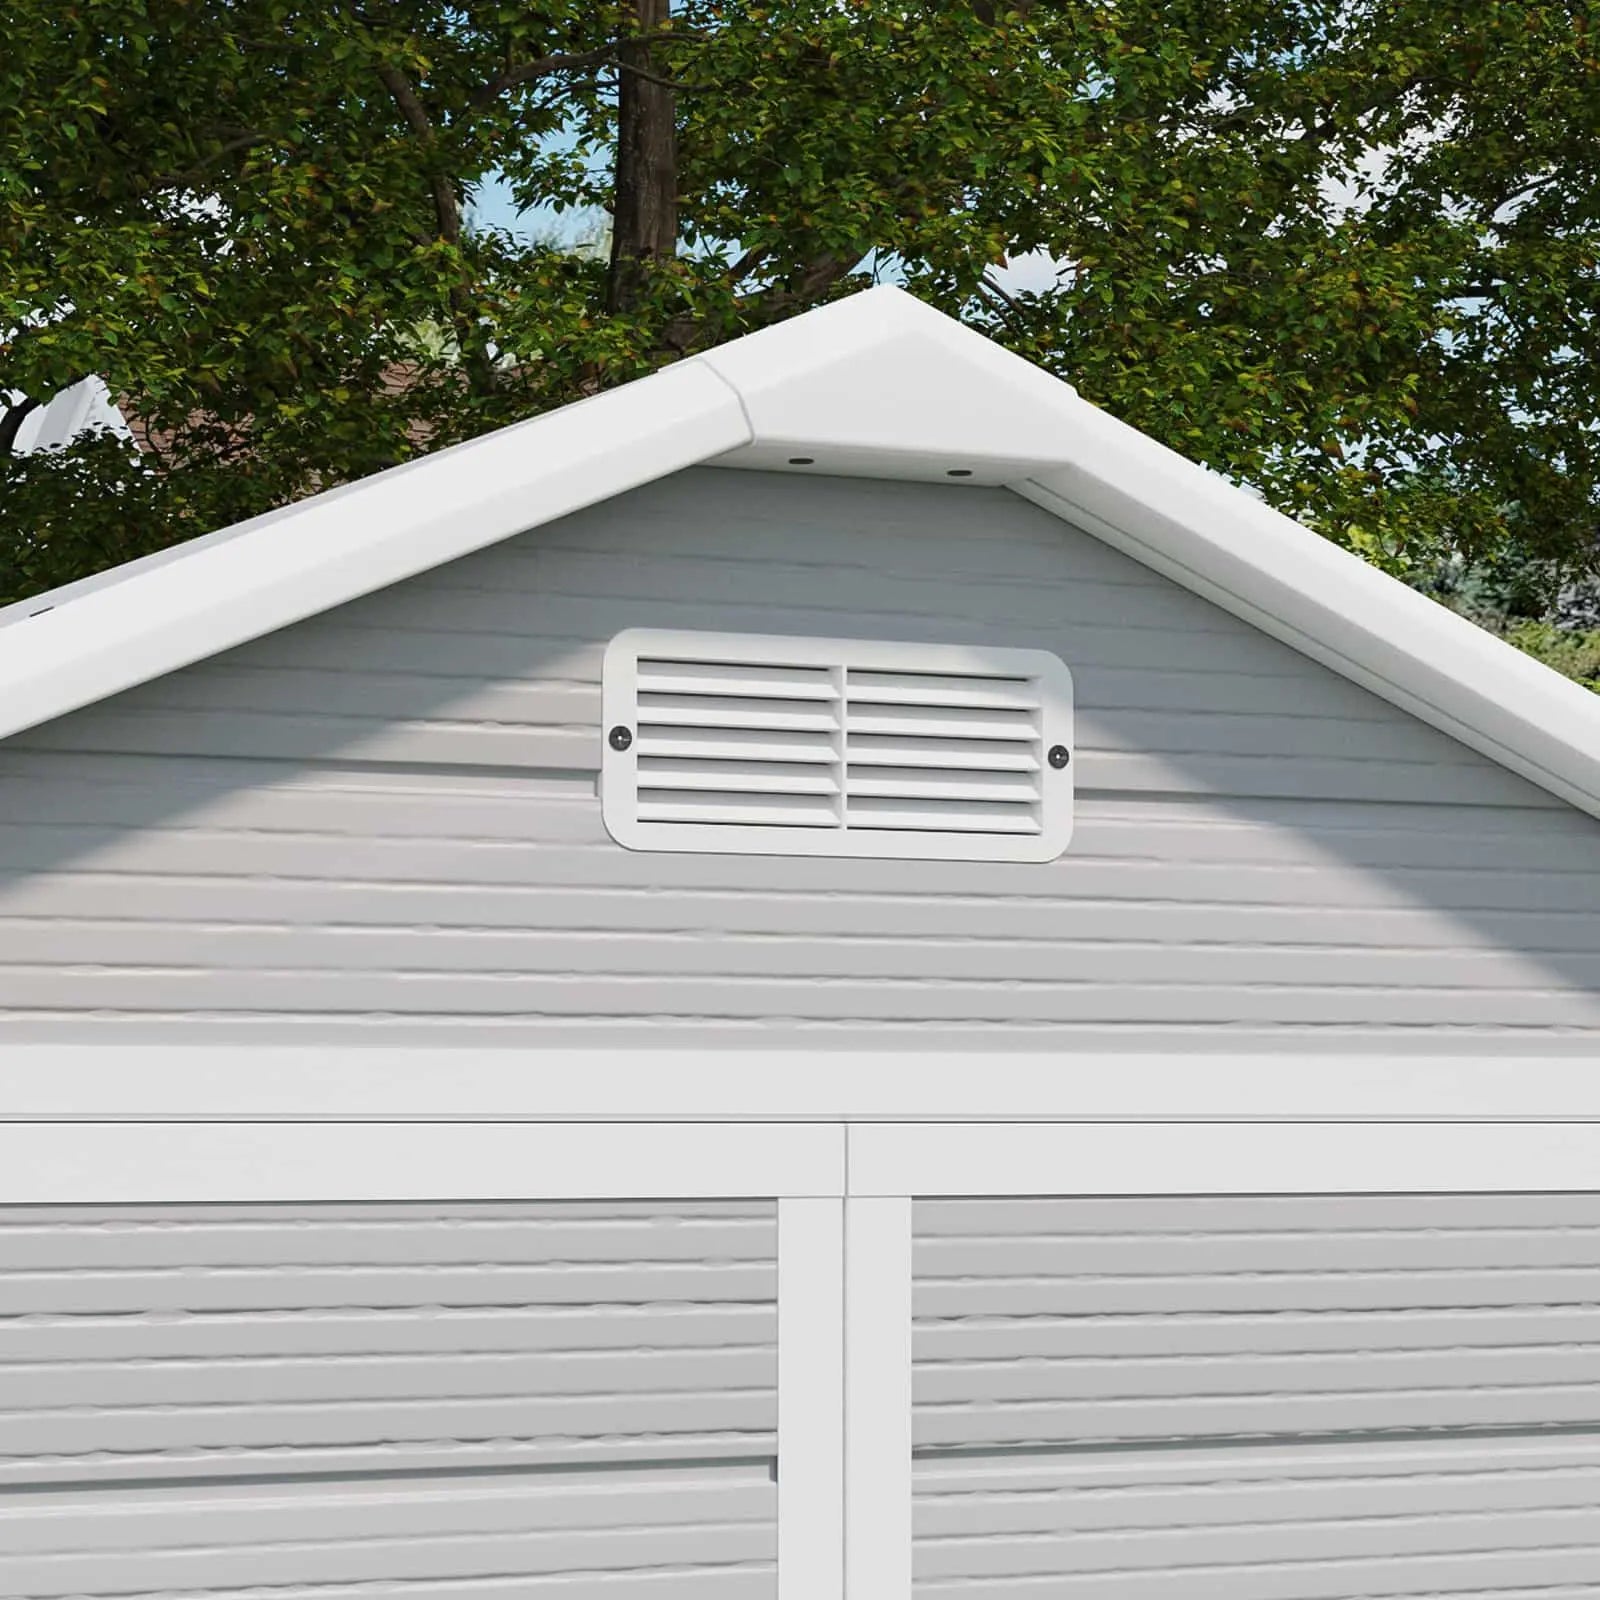 Patiowell 6x4 Plastic Shed-Air Vent